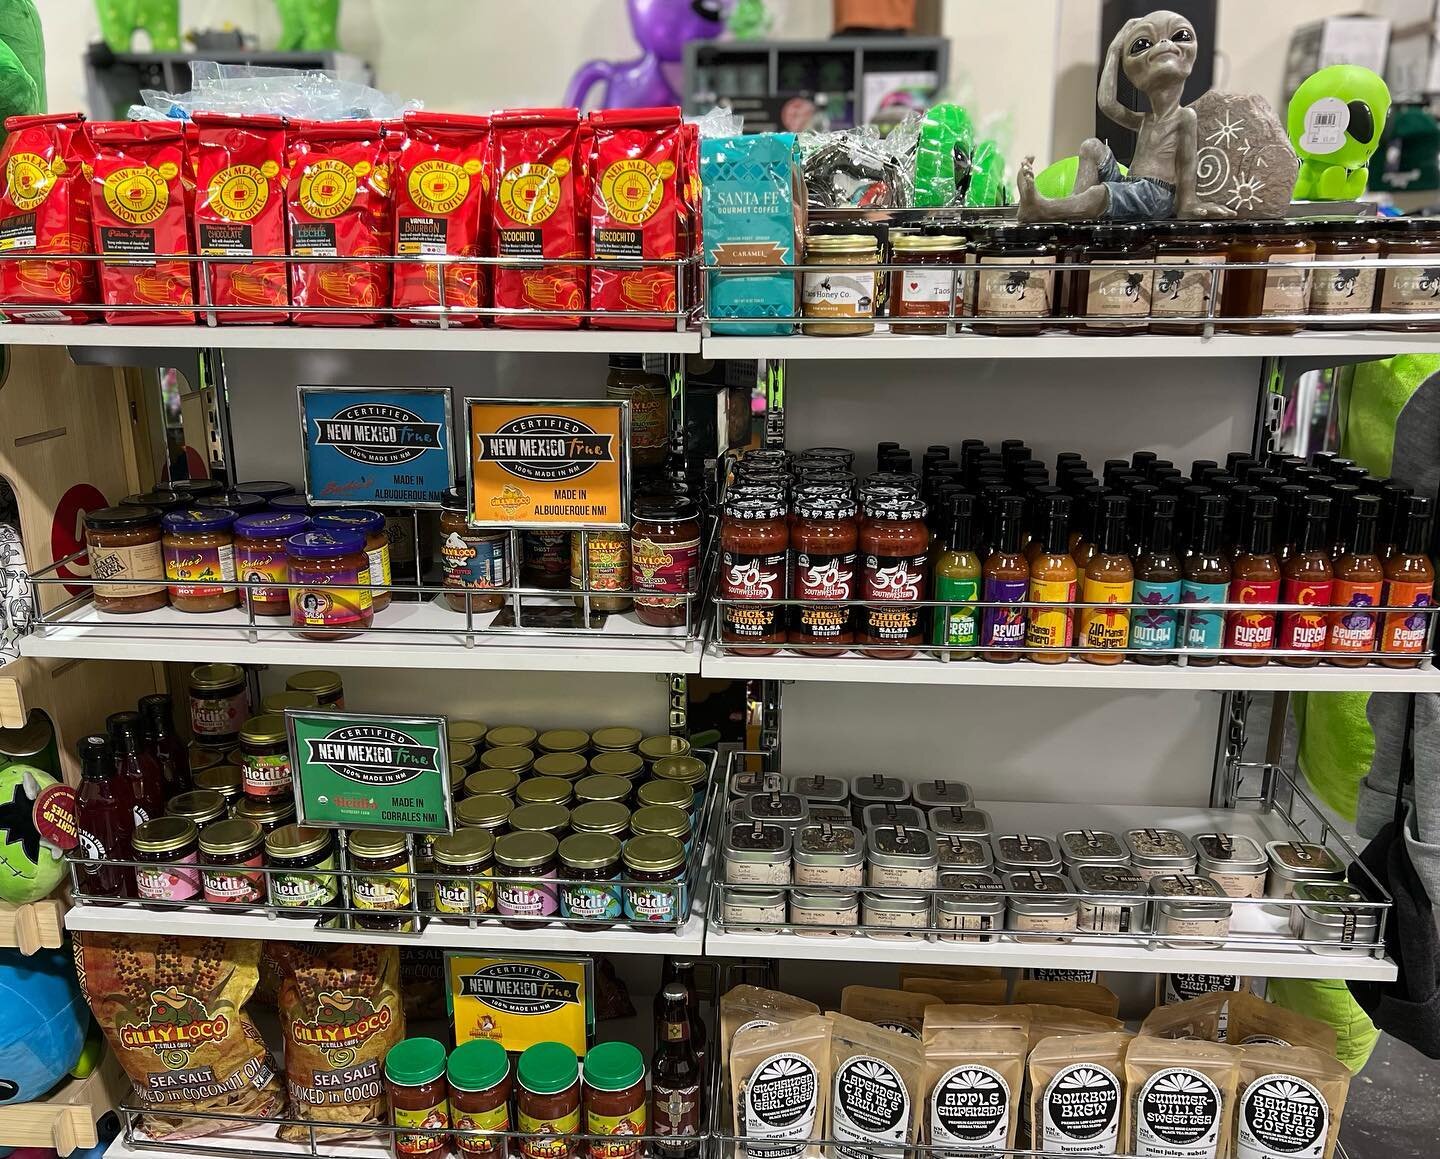 Check out our certified #newmexicotrue section at the shop!
.
.
#moonmanprinting #roswellnm #downtownroswell #roswellnewmexico #mainstreetroswell #roswell #newmexicotrue #madeinnm #madeinnewmexico #nmpinoncoffee #sadiesofnewmexico #oldbarrelteacompan